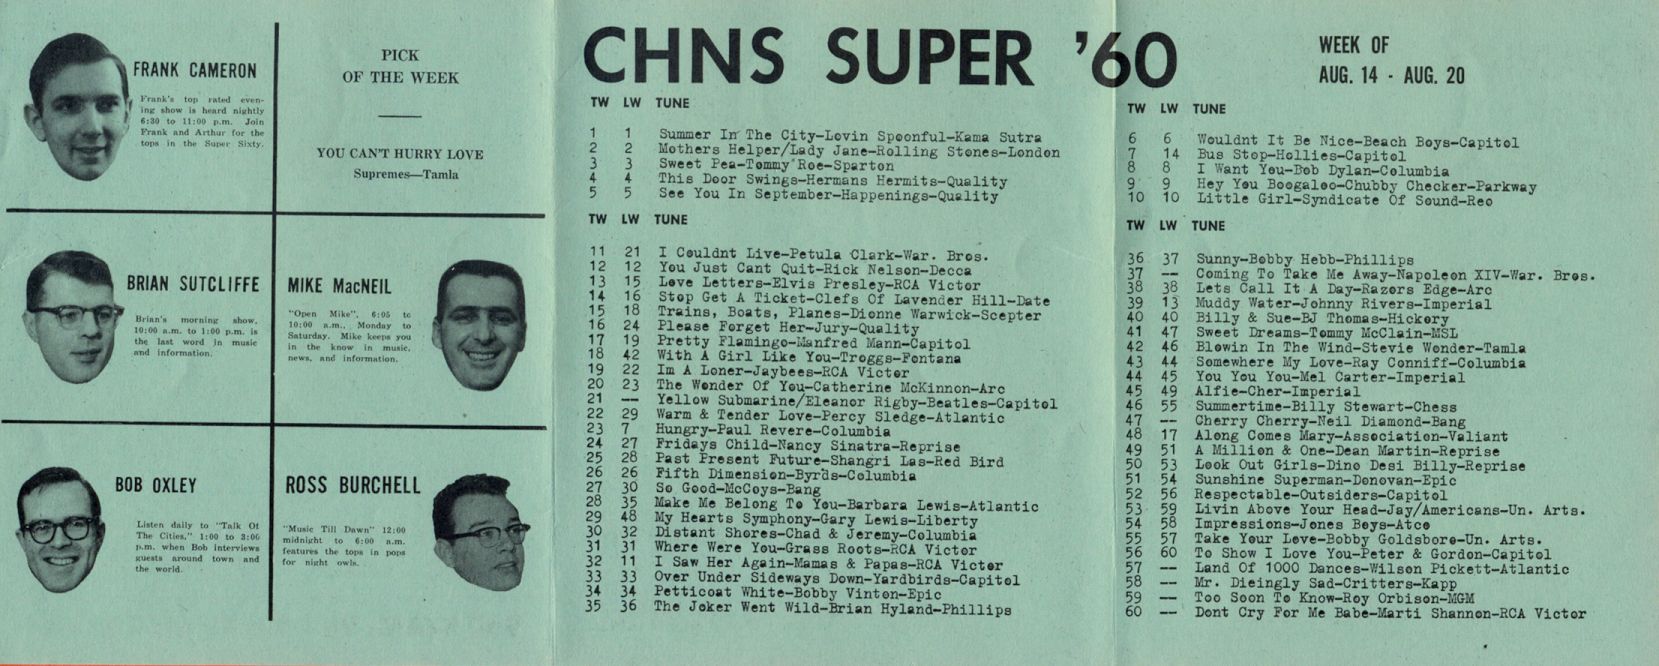 1966 CHNS Top 60 Chart></A>
<BR>
<I>CHNS Super 60music chart, courtesy of Dianne Lefort, Truro<BR>
Click on photo for a closer look</I>
<P>
Steve Smith is a freelance writer who lives in Fall River. <P>

</td></tr>
</TABLE>
</BODY>
</HTML>